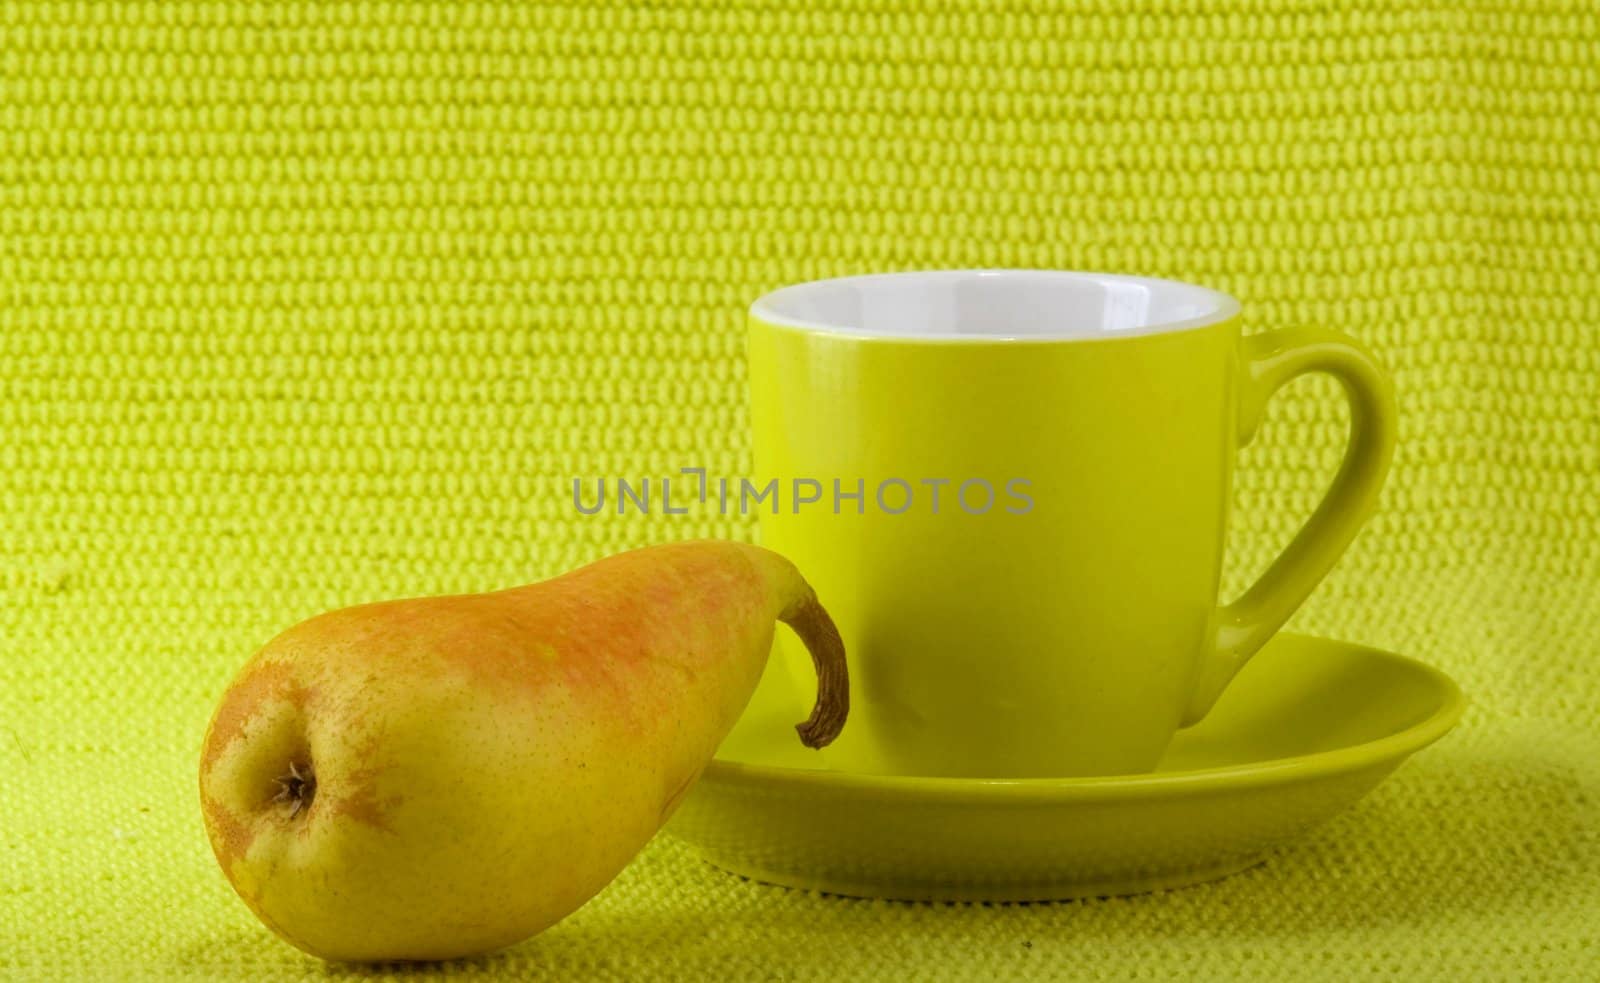 Light green cup on a light green saucer and knife with light green plastic handle on the light green fabric background